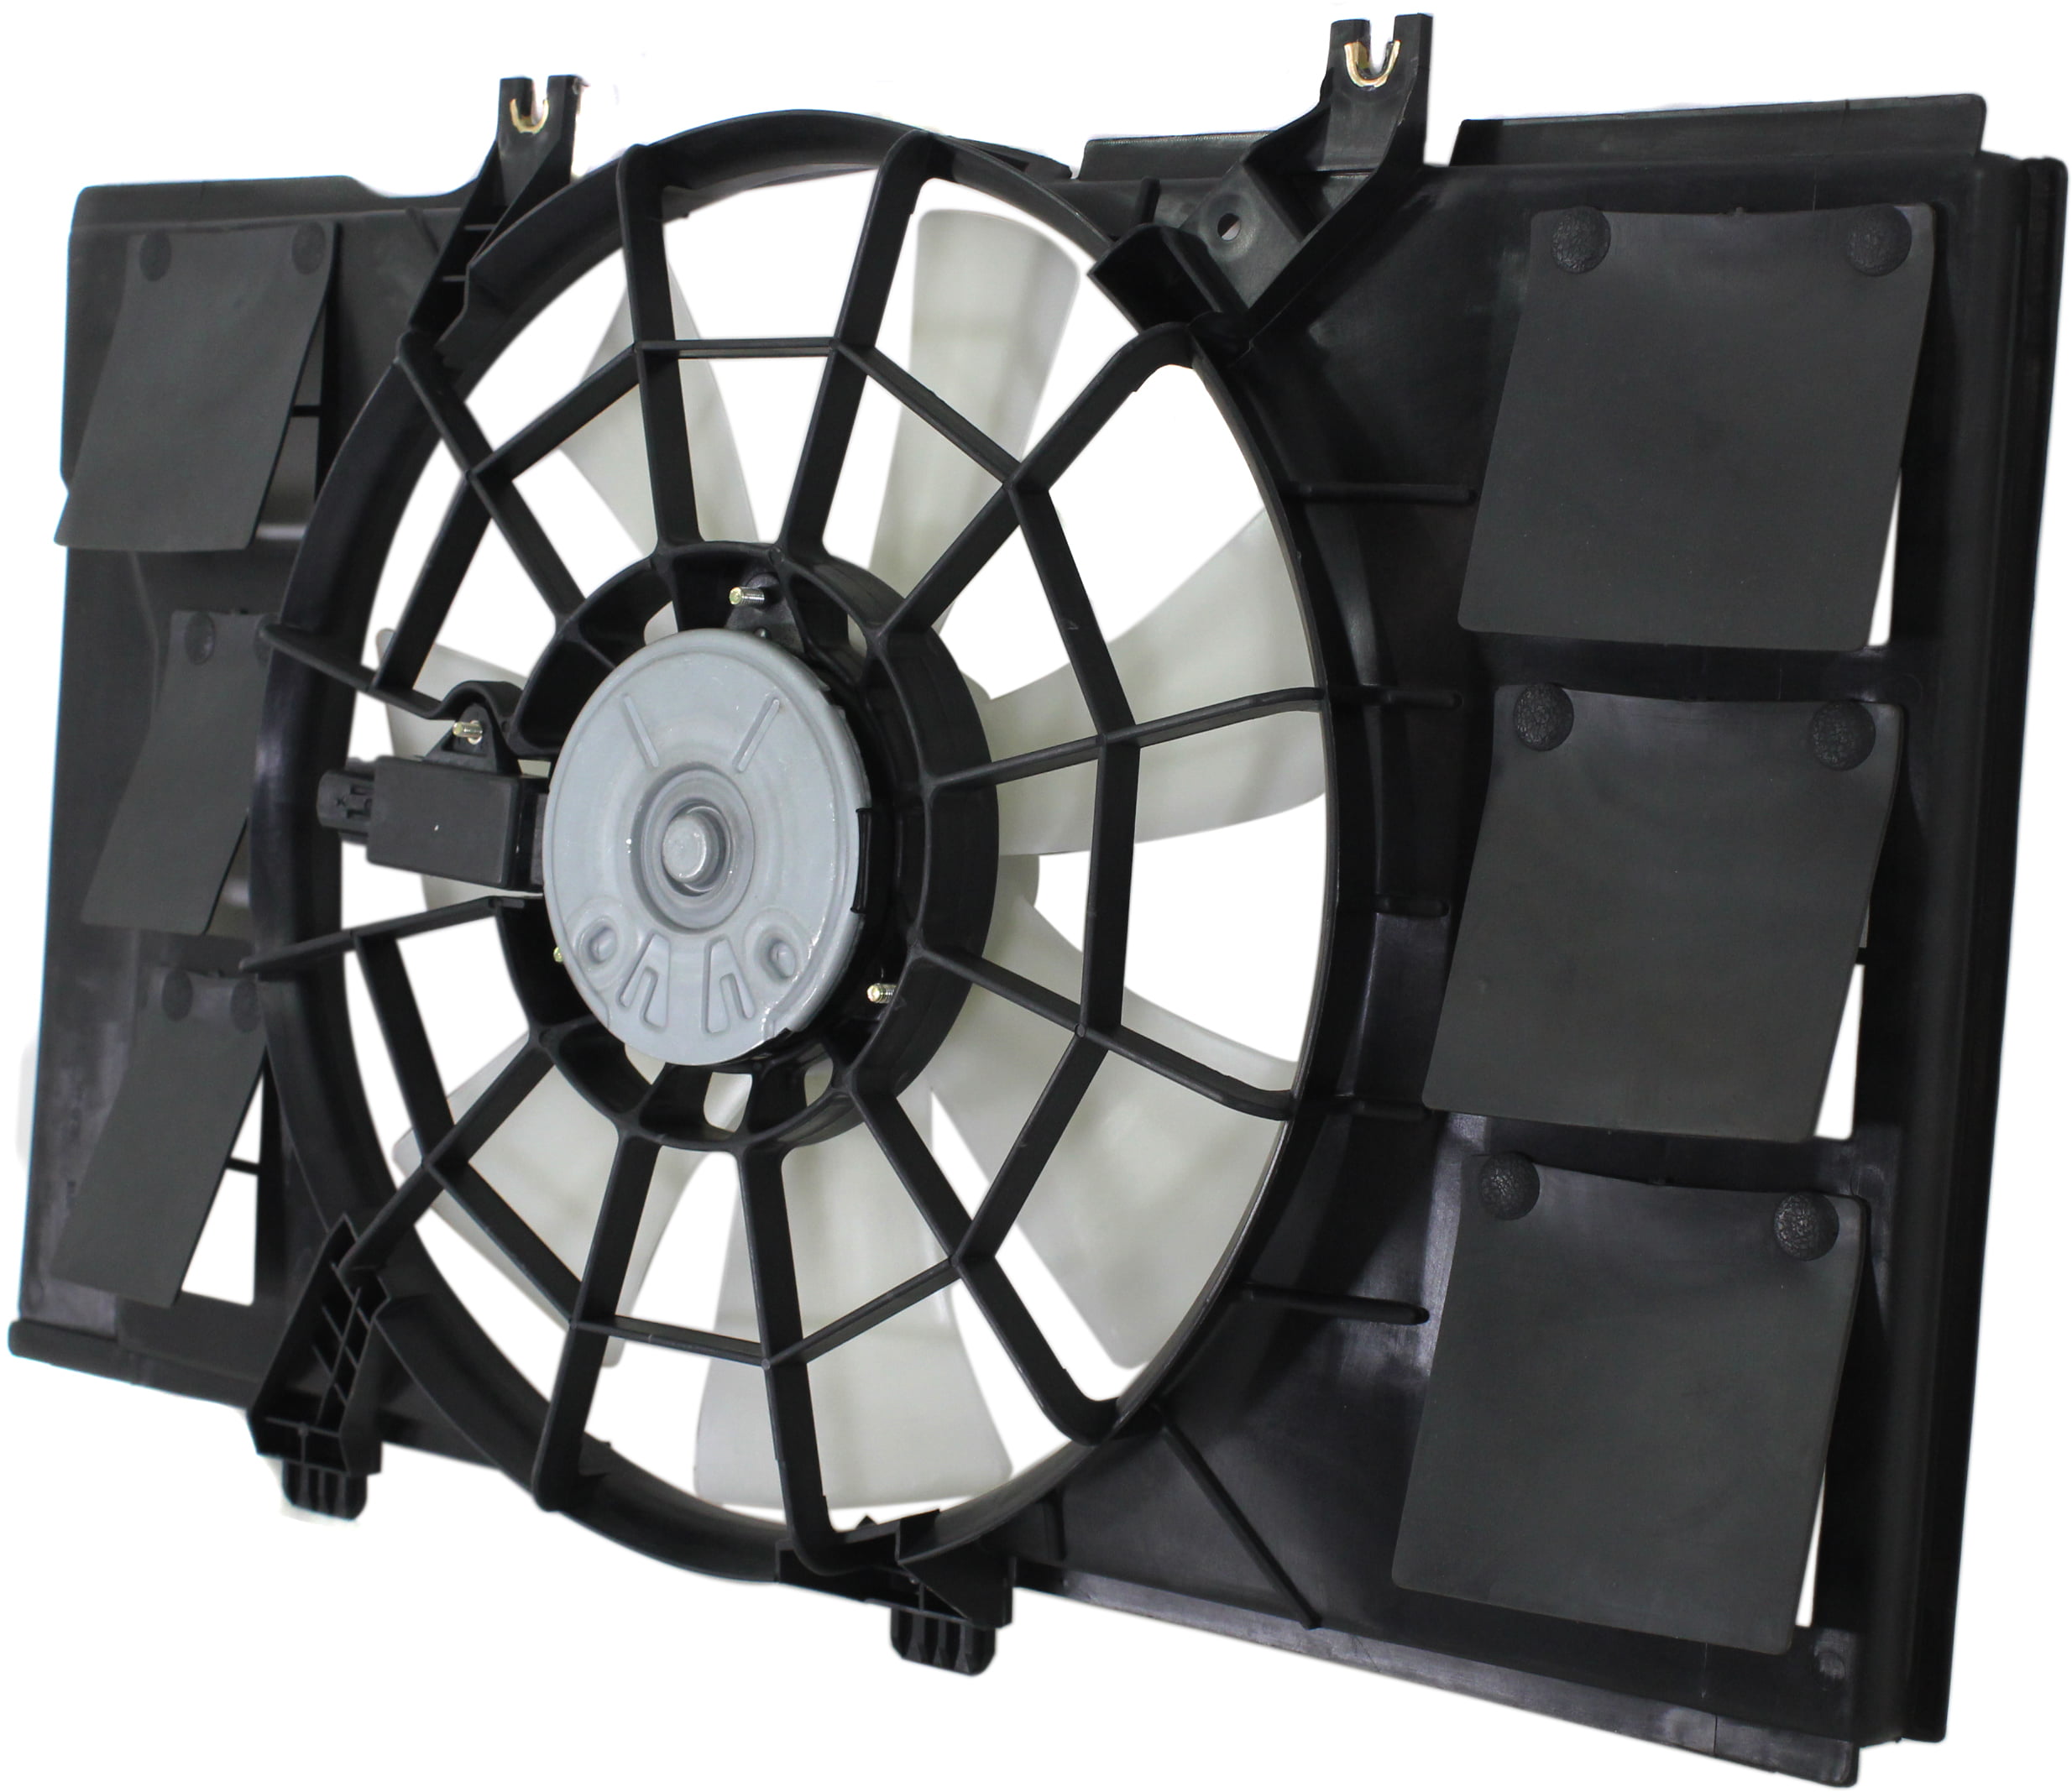 Radiator Cooling Fan For 2000-2001 Dodge Neon Plymouth Neon